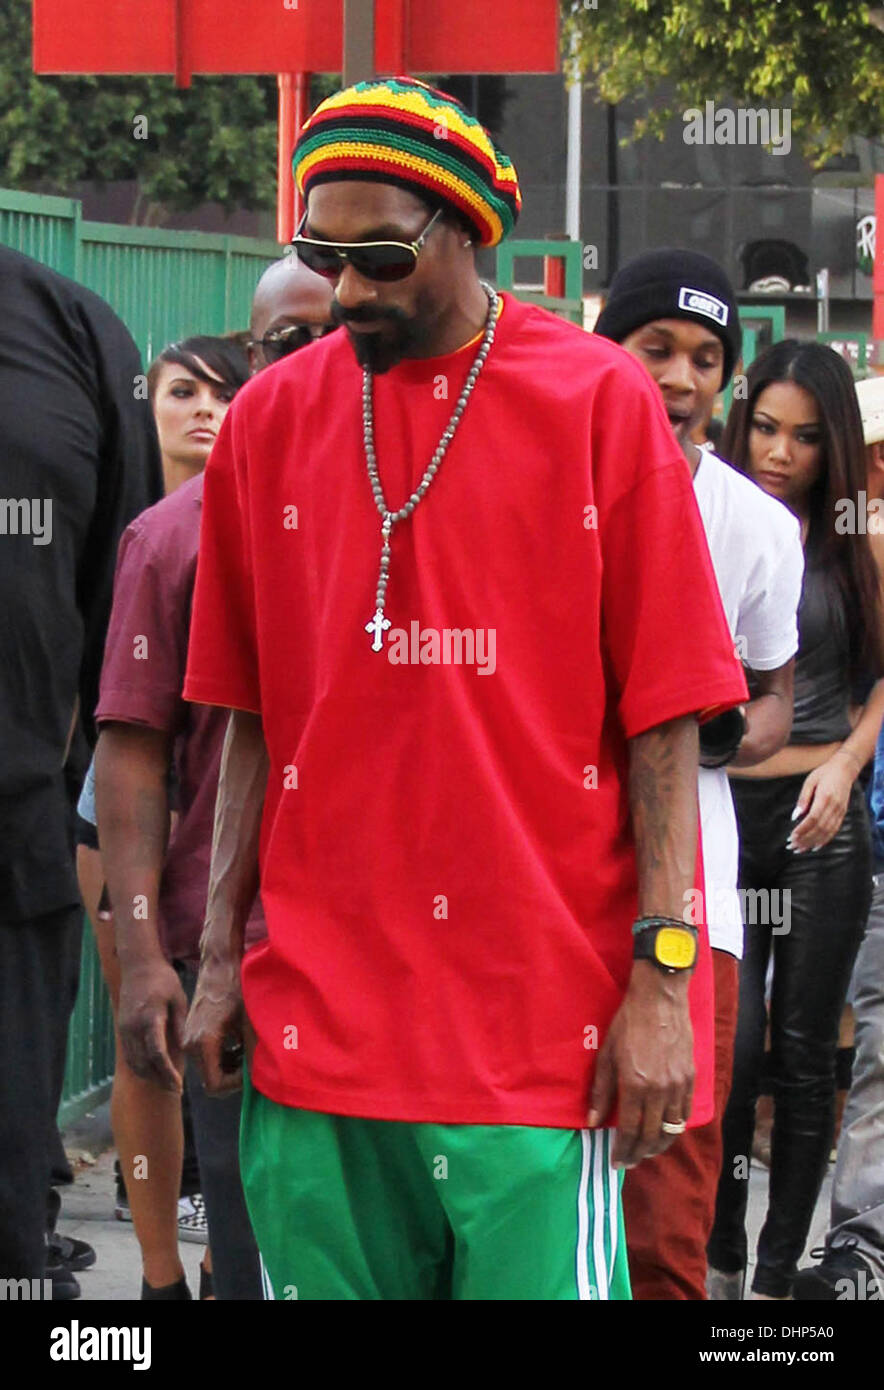 Snoop Dogg arrives on set of his latest music video in downtown Los  Angeles. The Gin and Juice hitmaker wore a Rastafari style Adidas tracksuit  and was seen behind the wheel of